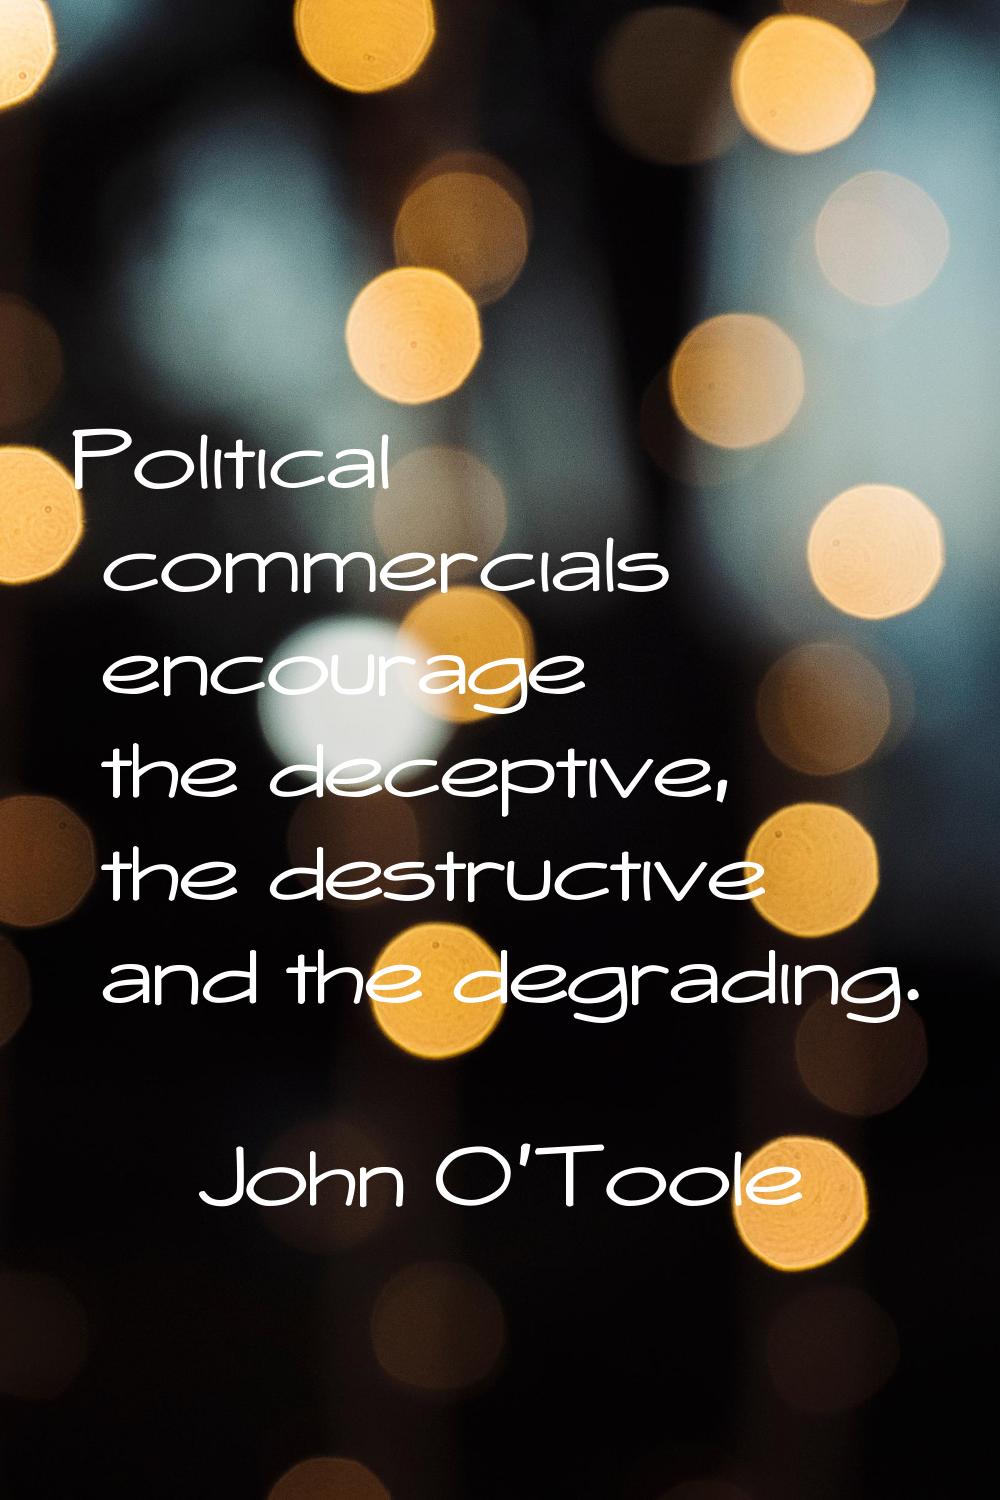 Political commercials encourage the deceptive, the destructive and the degrading.